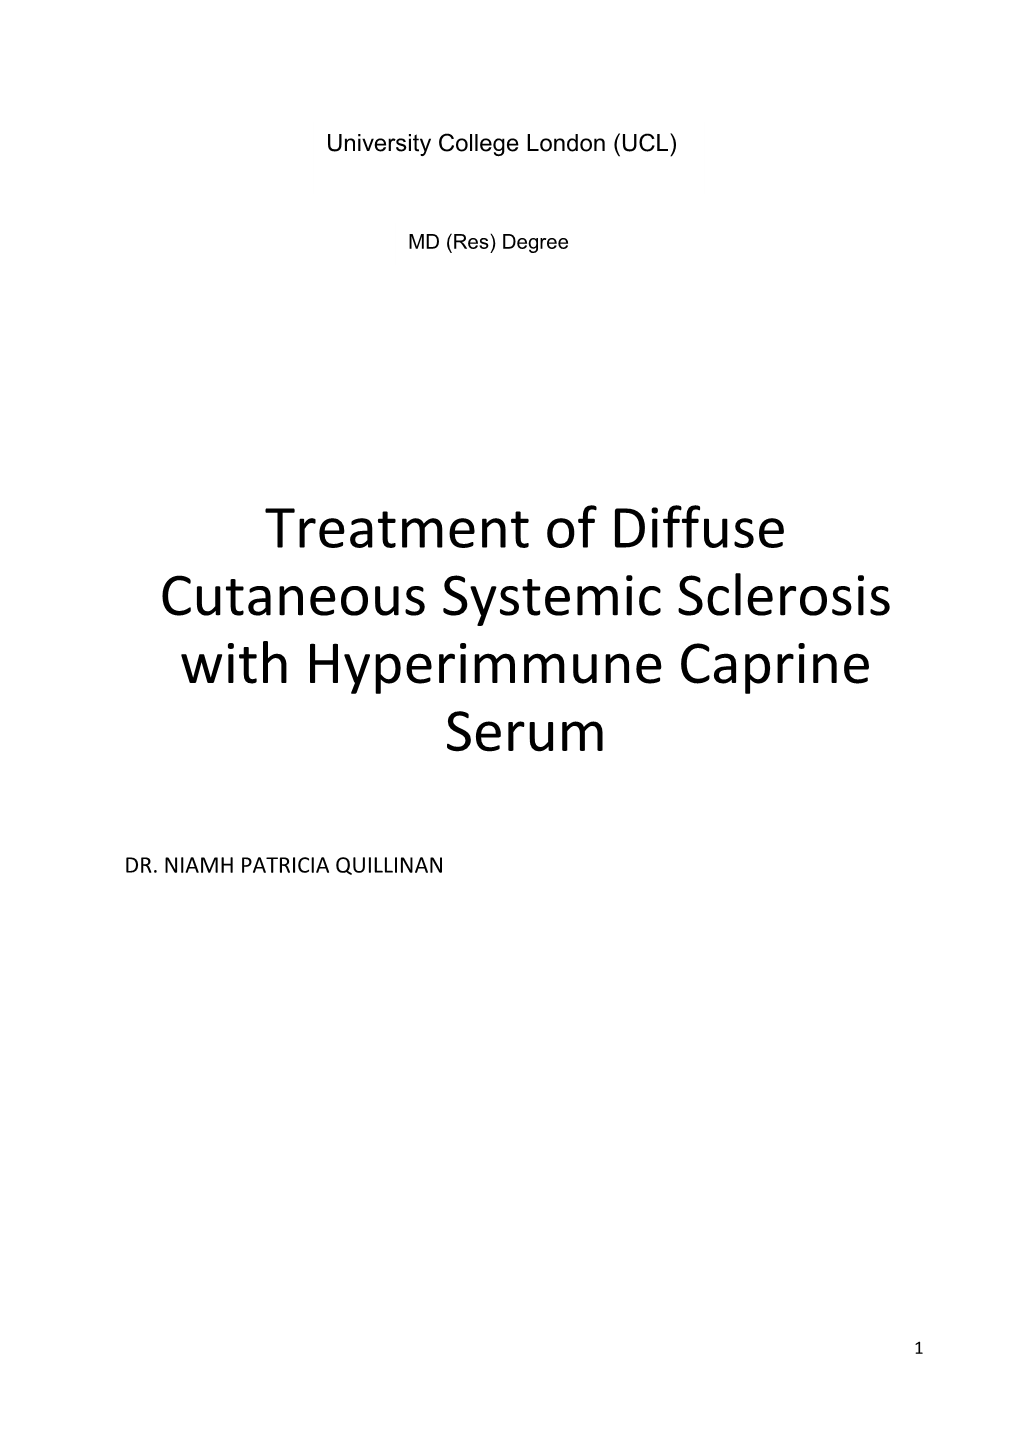 Treatment of Diffuse Cutaneous Systemic Sclerosis with Hyperimmune Caprine Serum